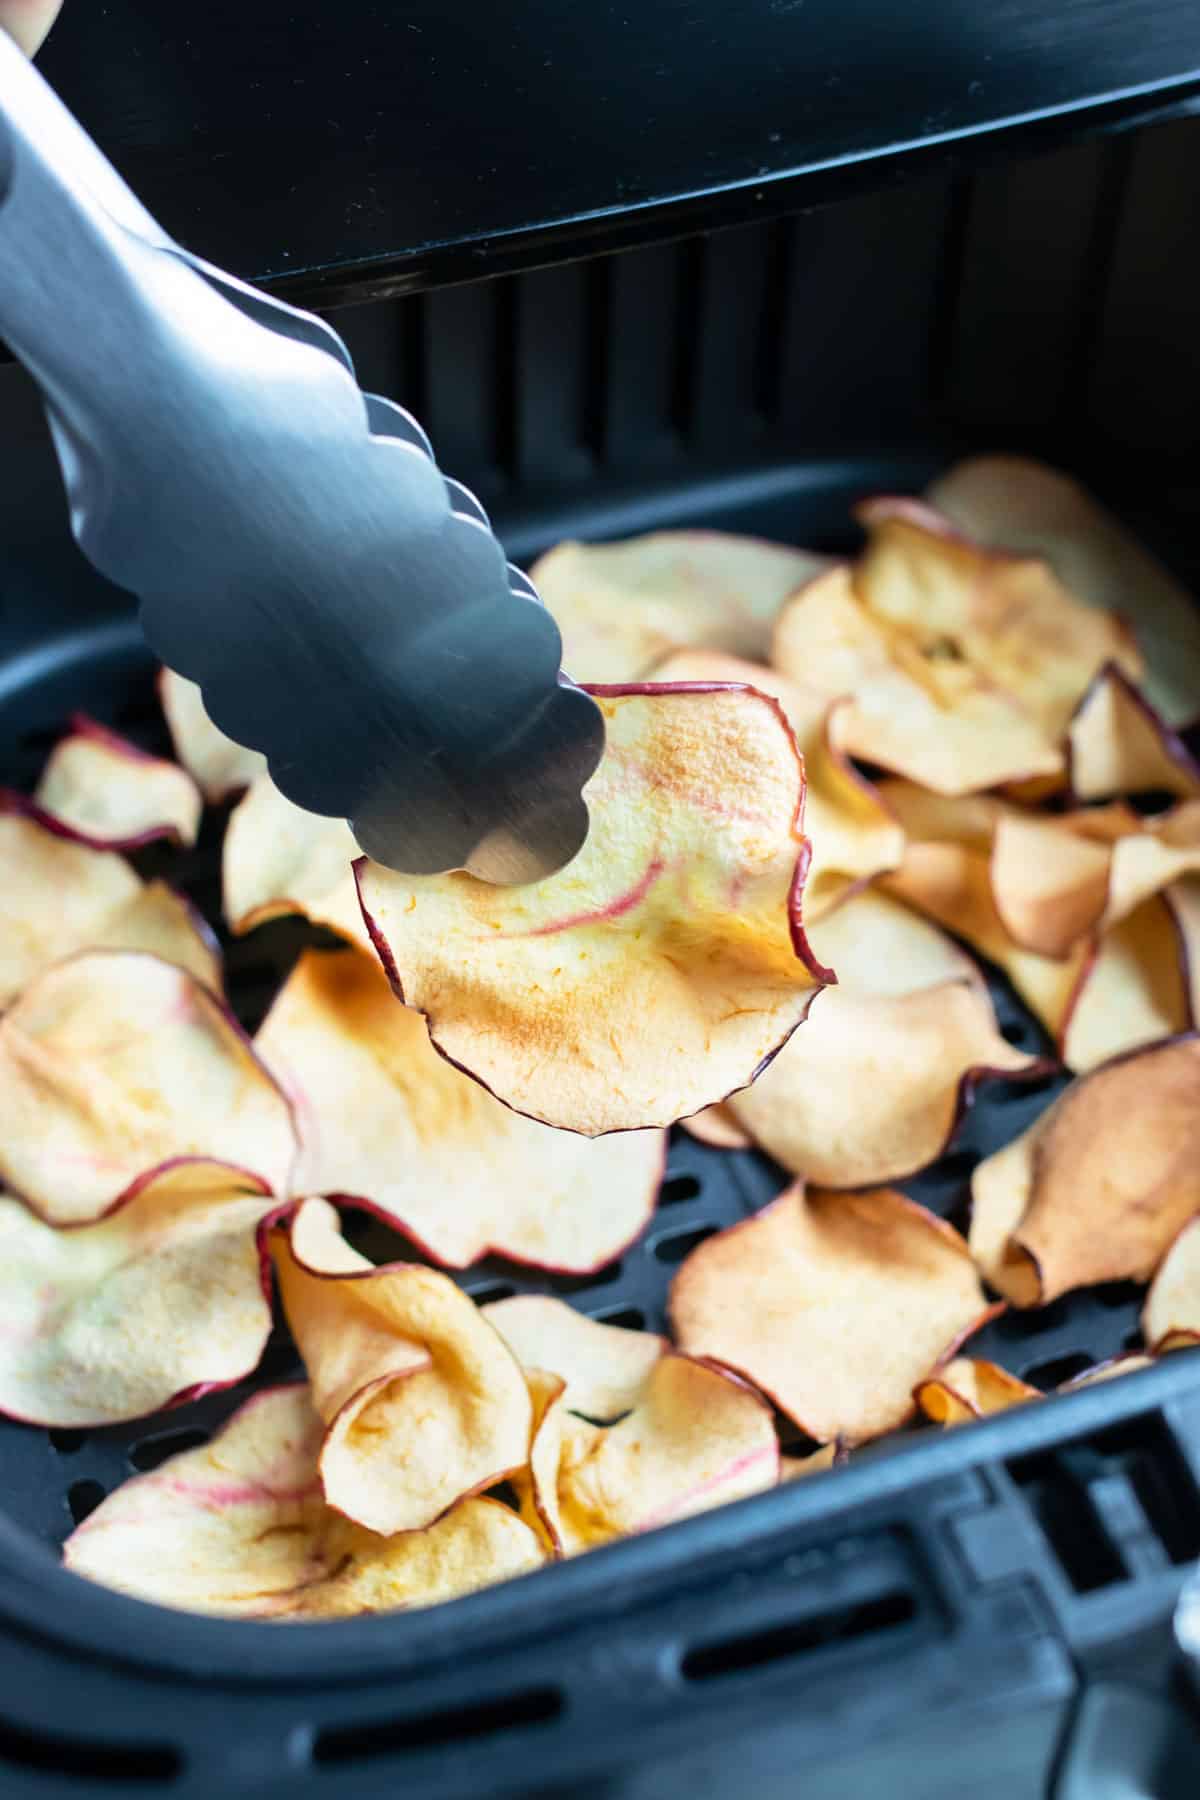 Tongs are used to remove the air fryer apple chips.